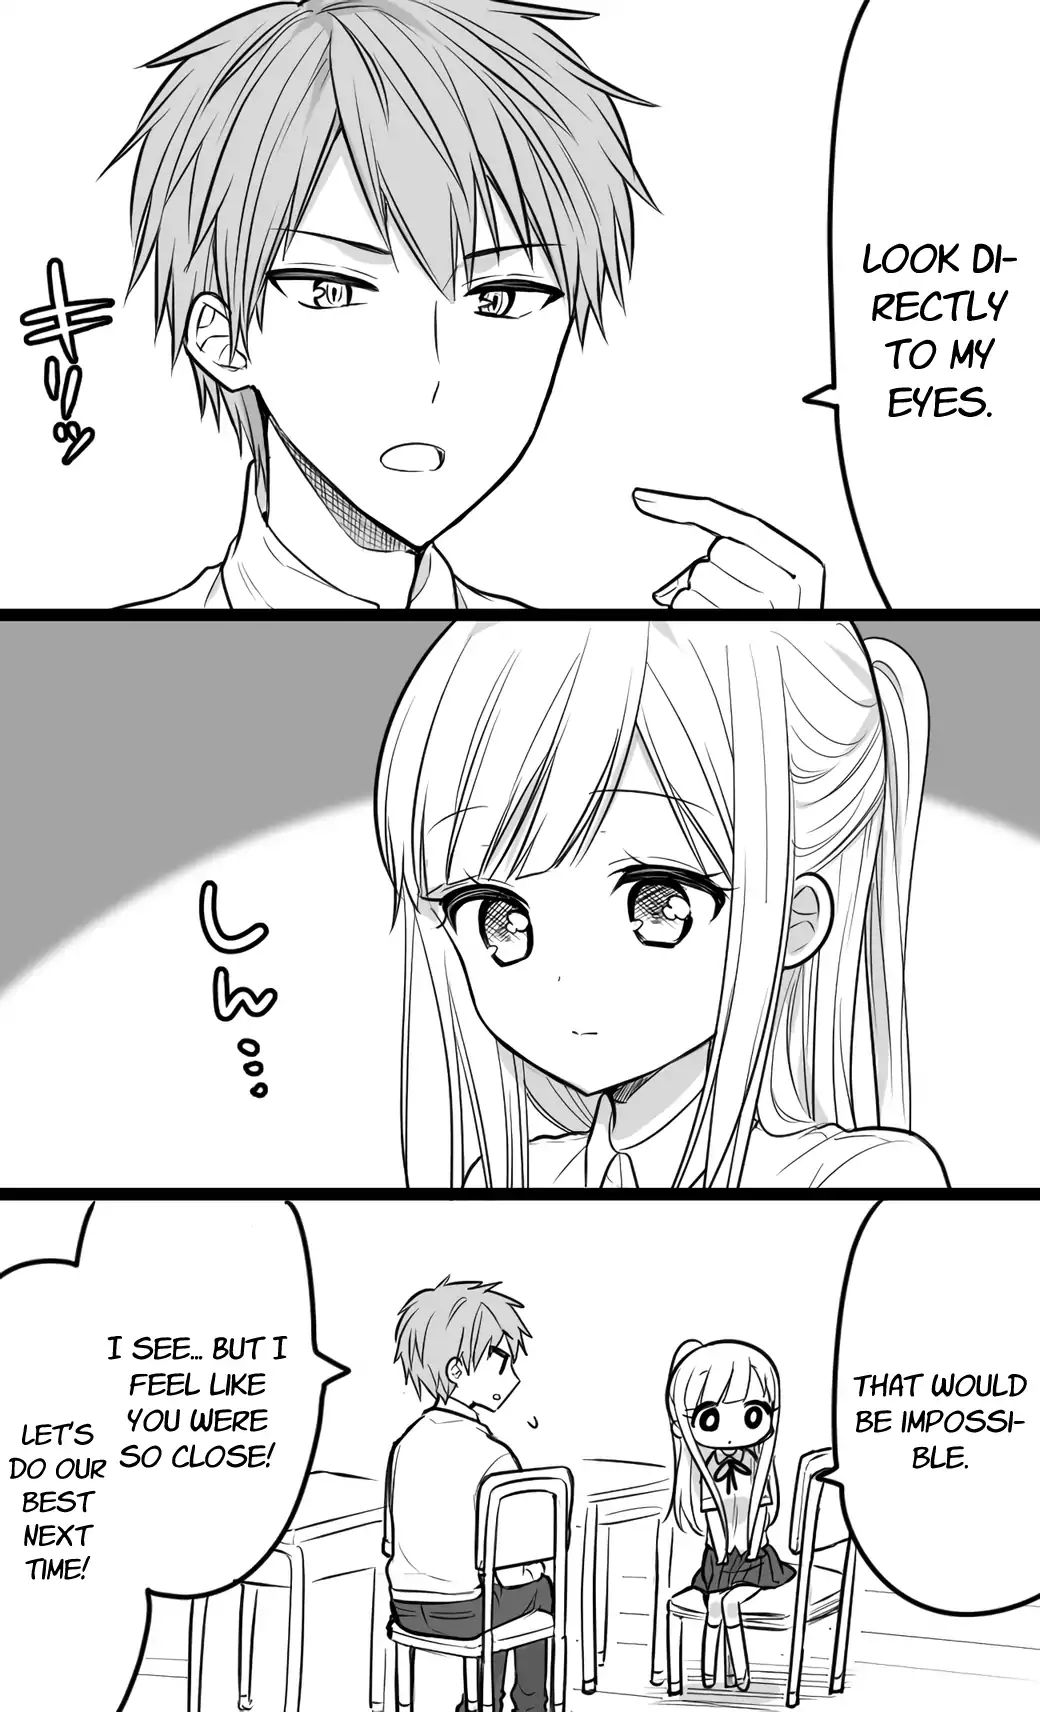 The Reason Why I Can't Look at His Eyes Directly - chapter 1 - #1